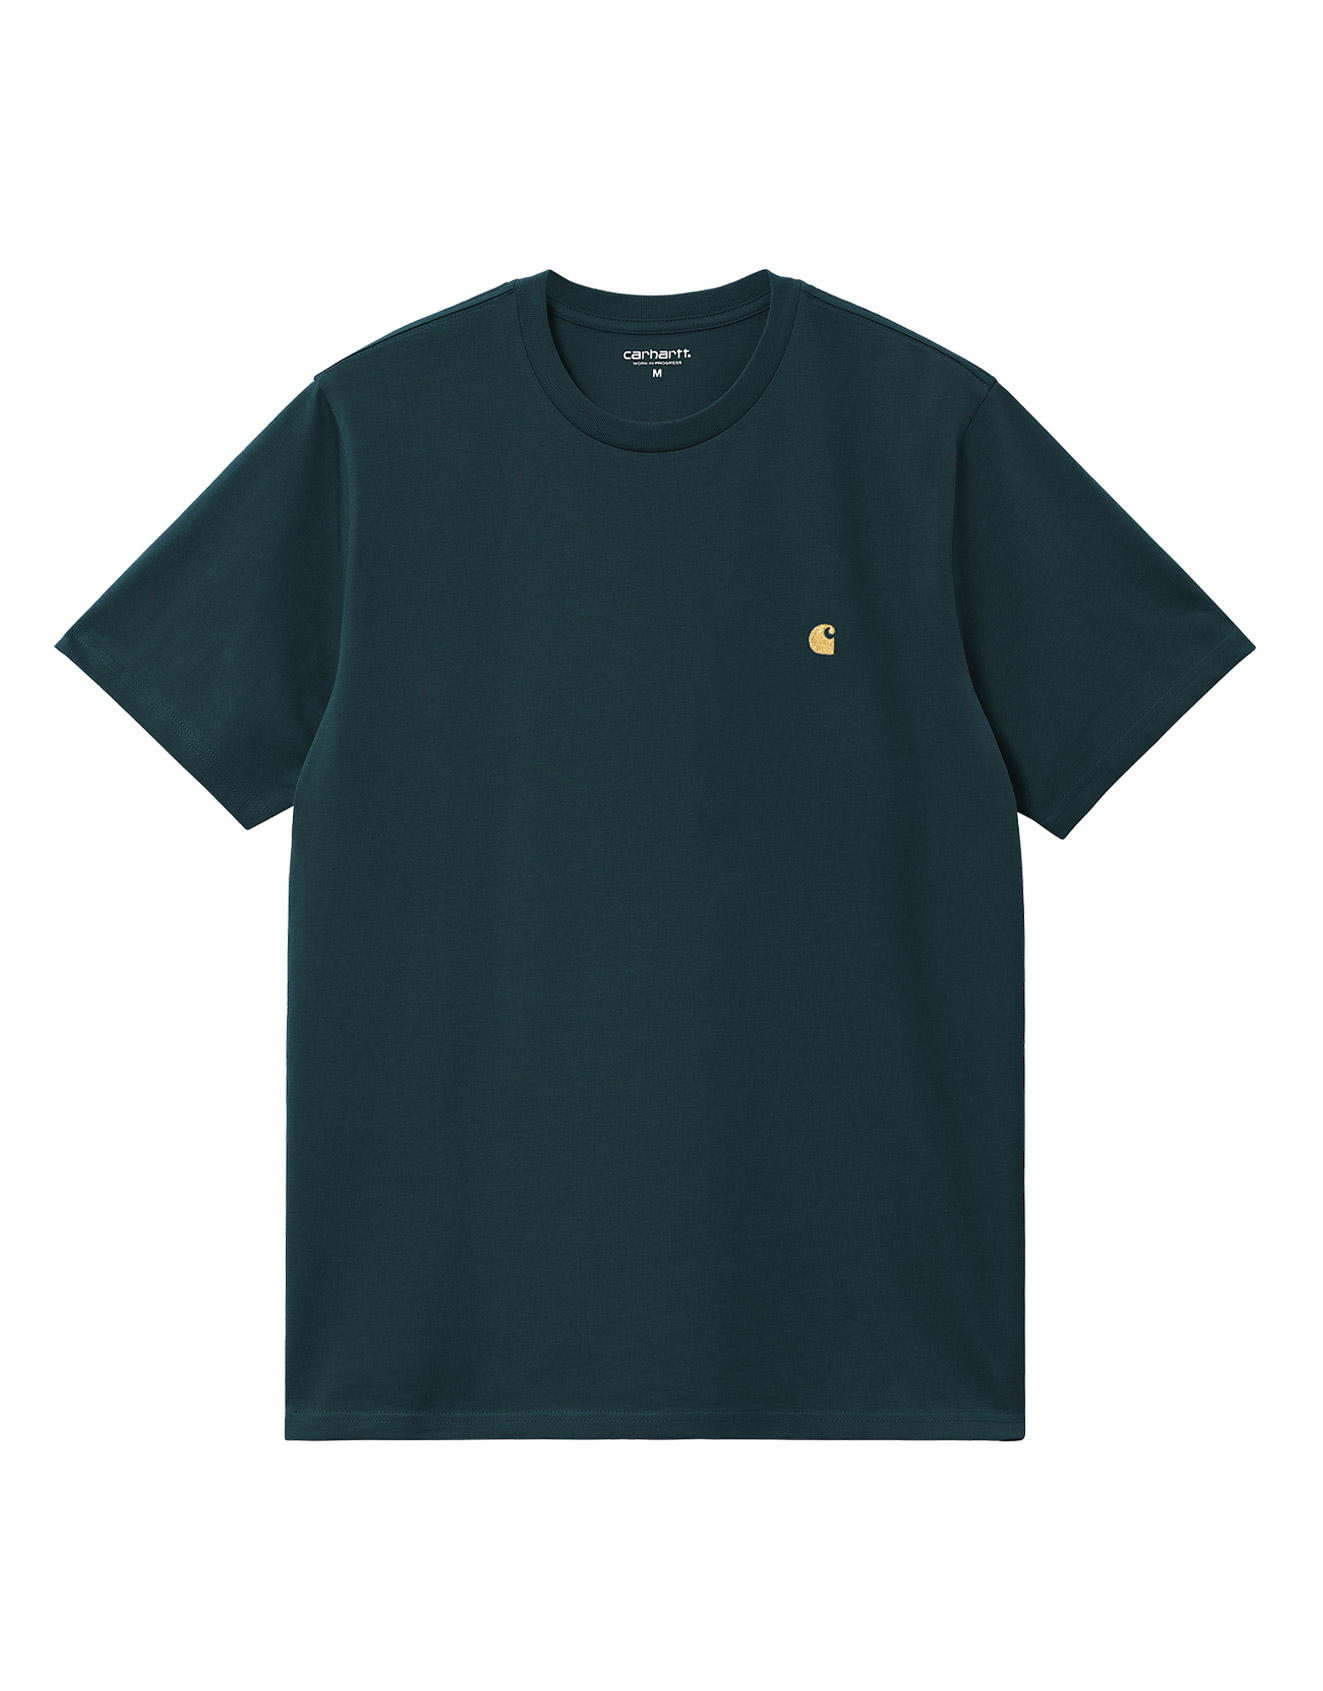 Carhartt WIP – S/S Chase T-Shirt